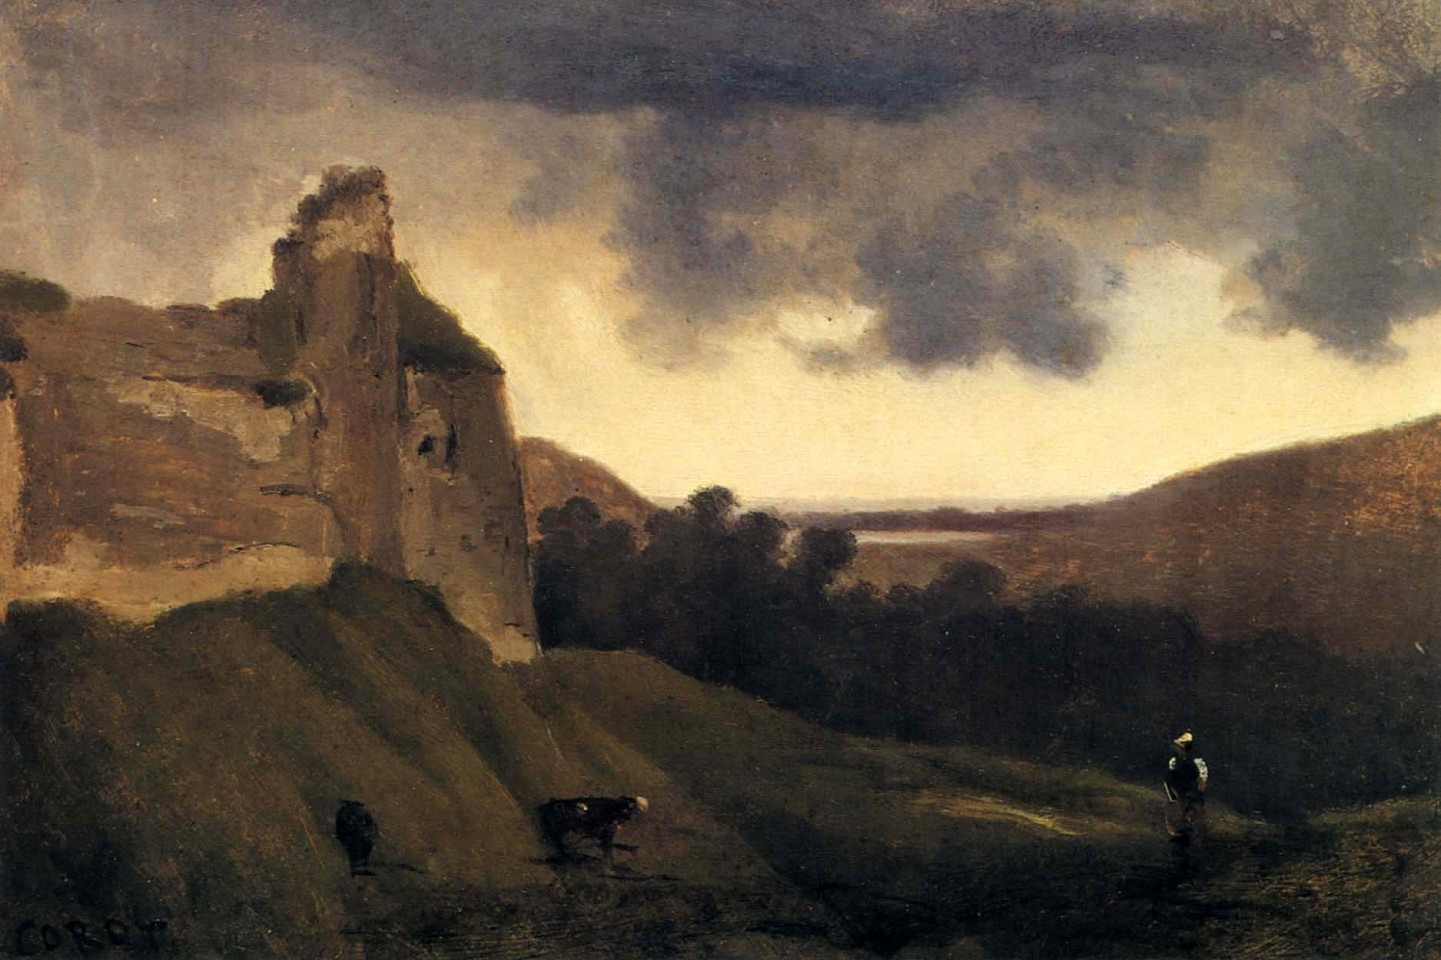 Jean Baptiste Camille Corot ,   Argues-Ruines du Chateau  ,  1828-30  
  Oil on canvas ,  8 1/4 x 12 1/4 in. (21 x 31.1 cm)  
  COR-005-PA  
   Appraisal Value : $0.00 
 Location : $0.00 
 User3 : $0.00